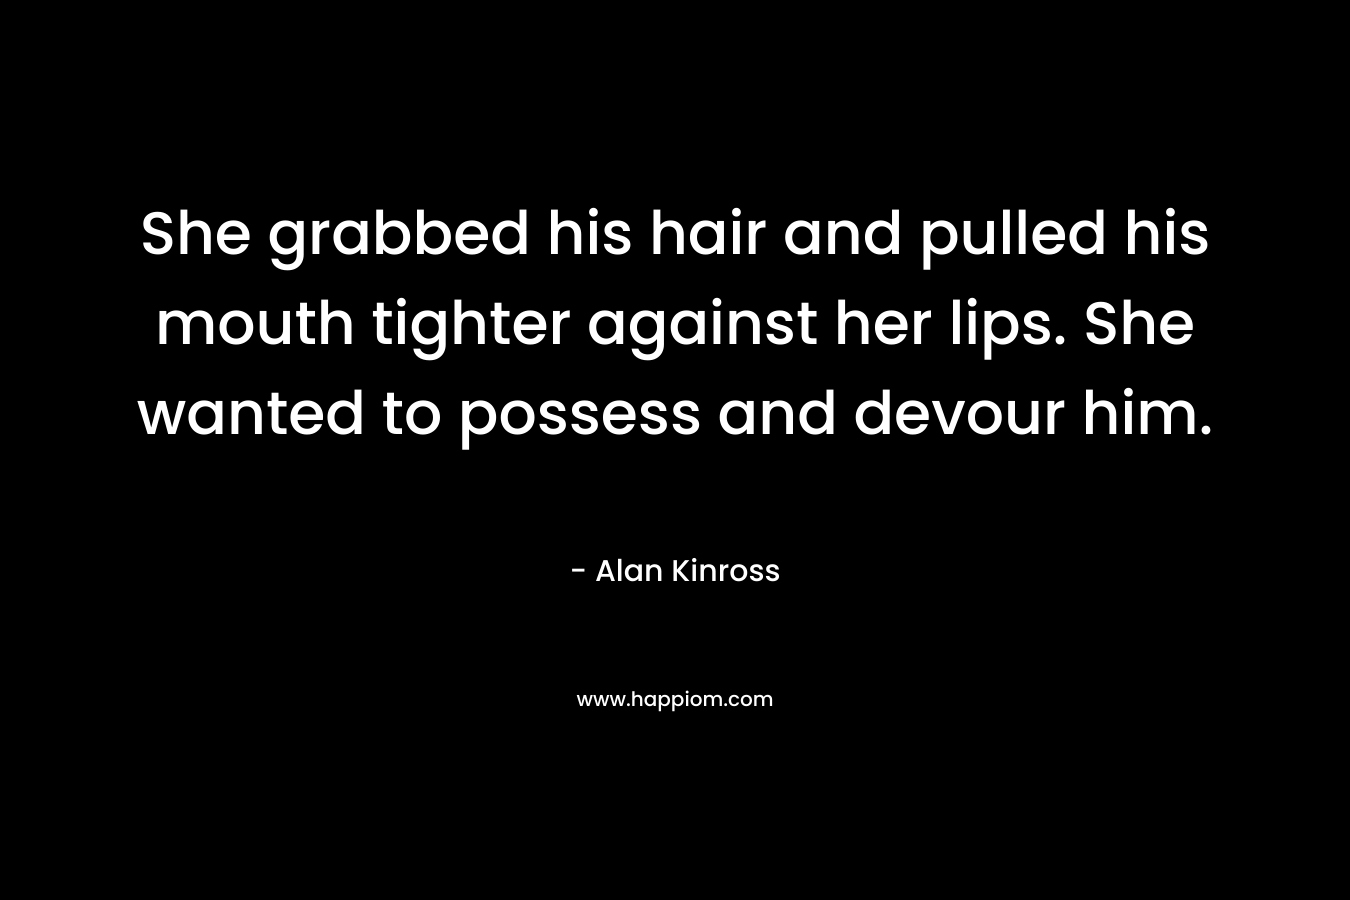 She grabbed his hair and pulled his mouth tighter against her lips. She wanted to possess and devour him.